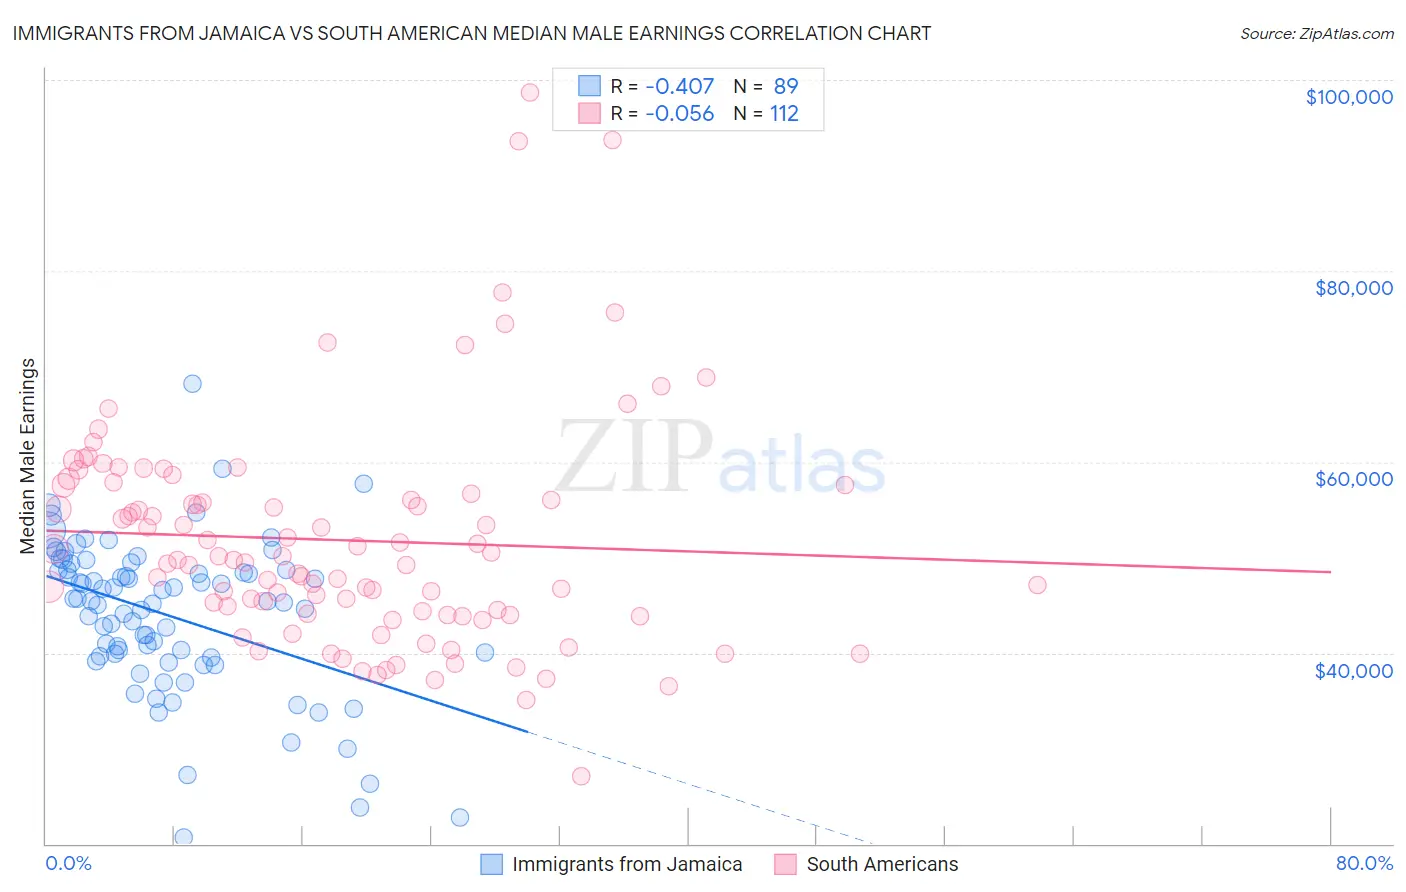 Immigrants from Jamaica vs South American Median Male Earnings